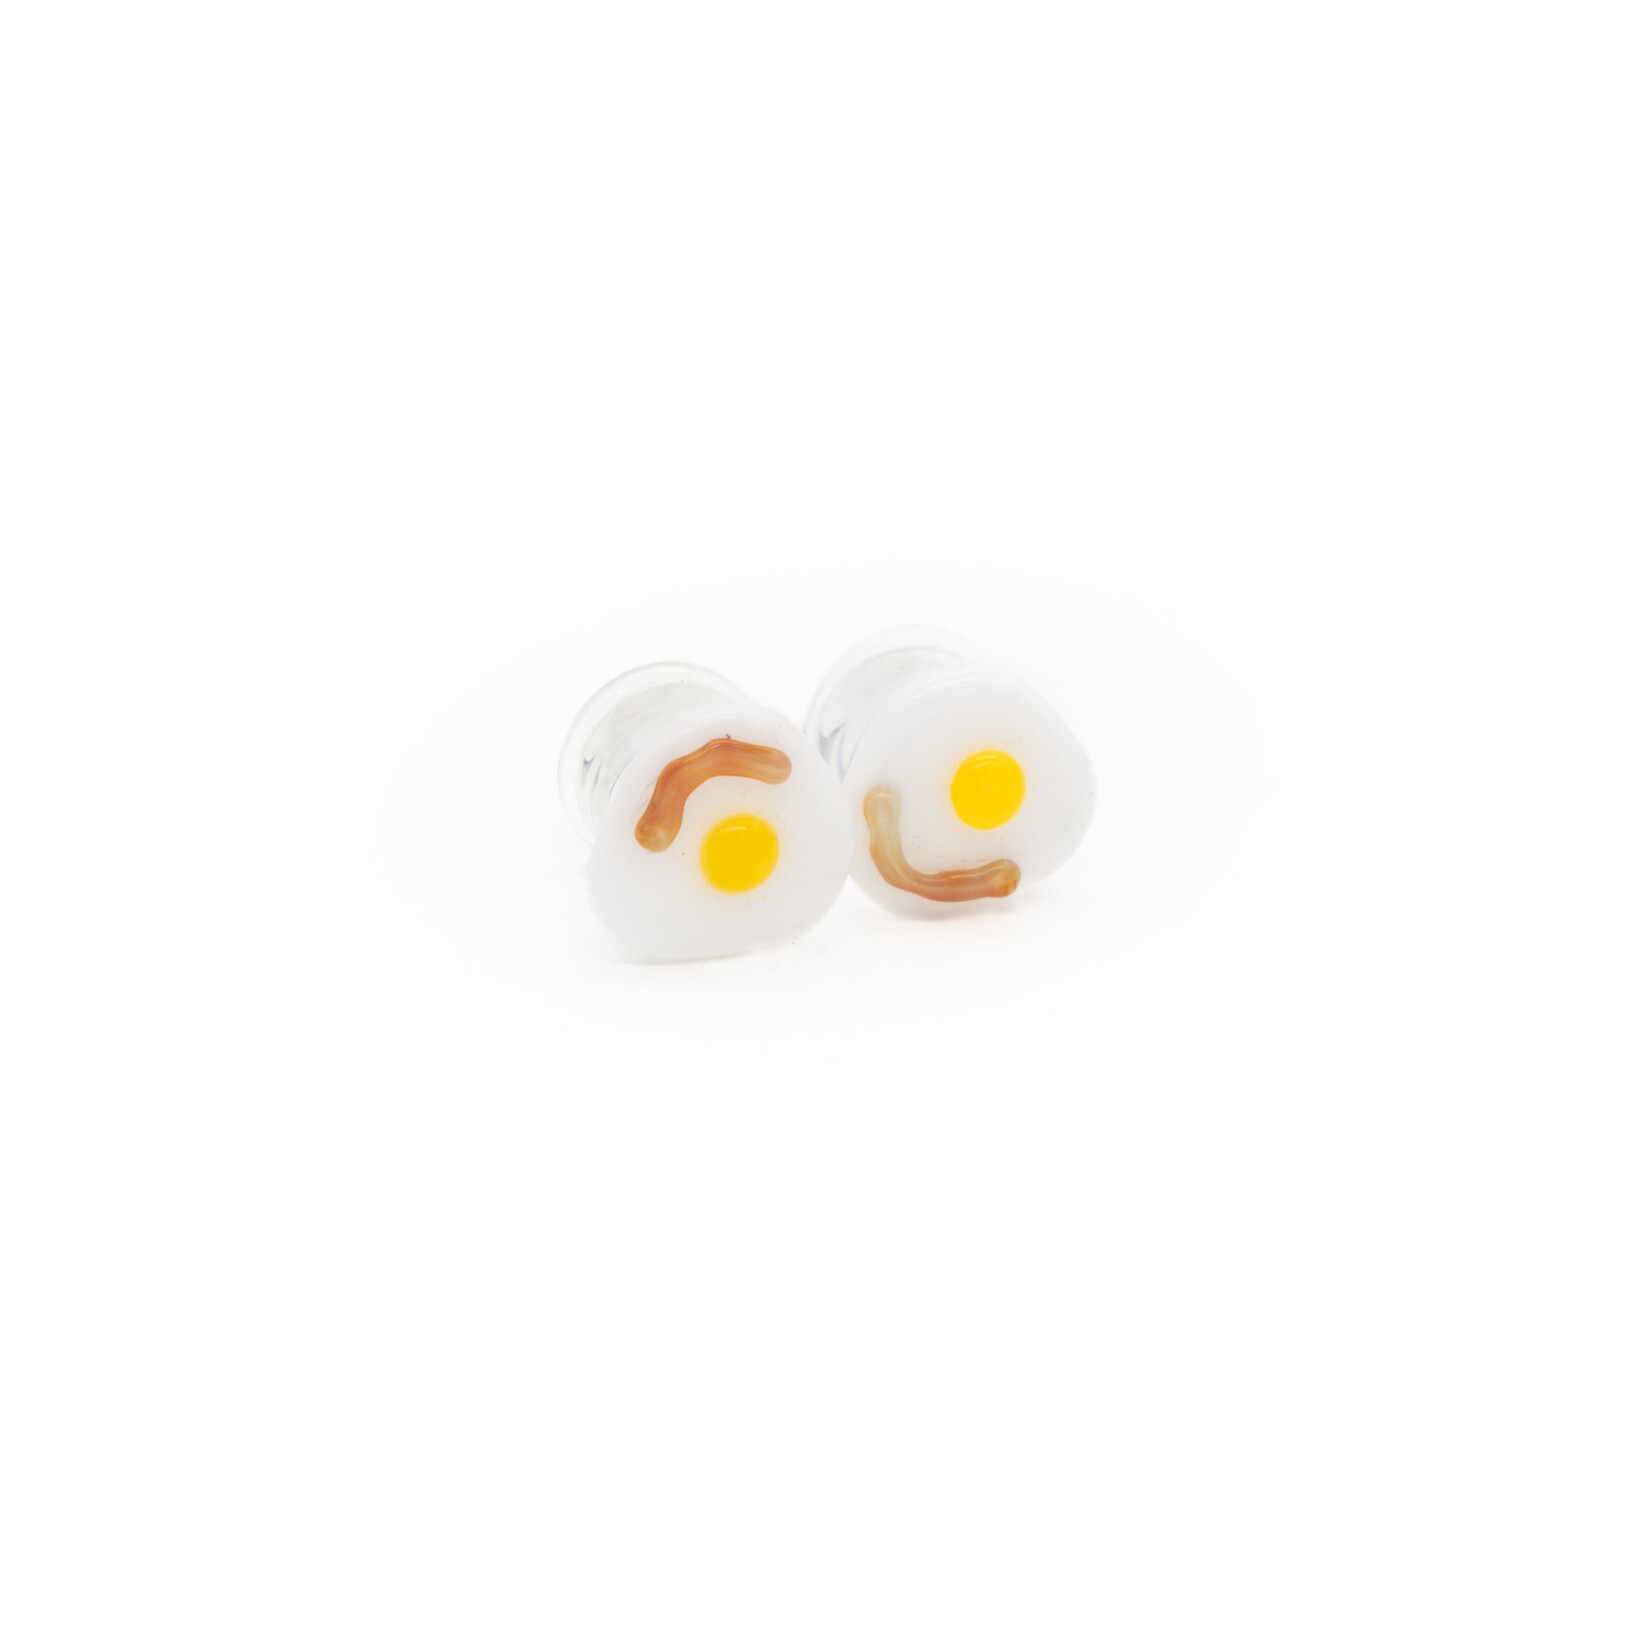 Gorilla Glass Double Flare (DF) Glass Plugs - Bacon n' Egg (Pair)